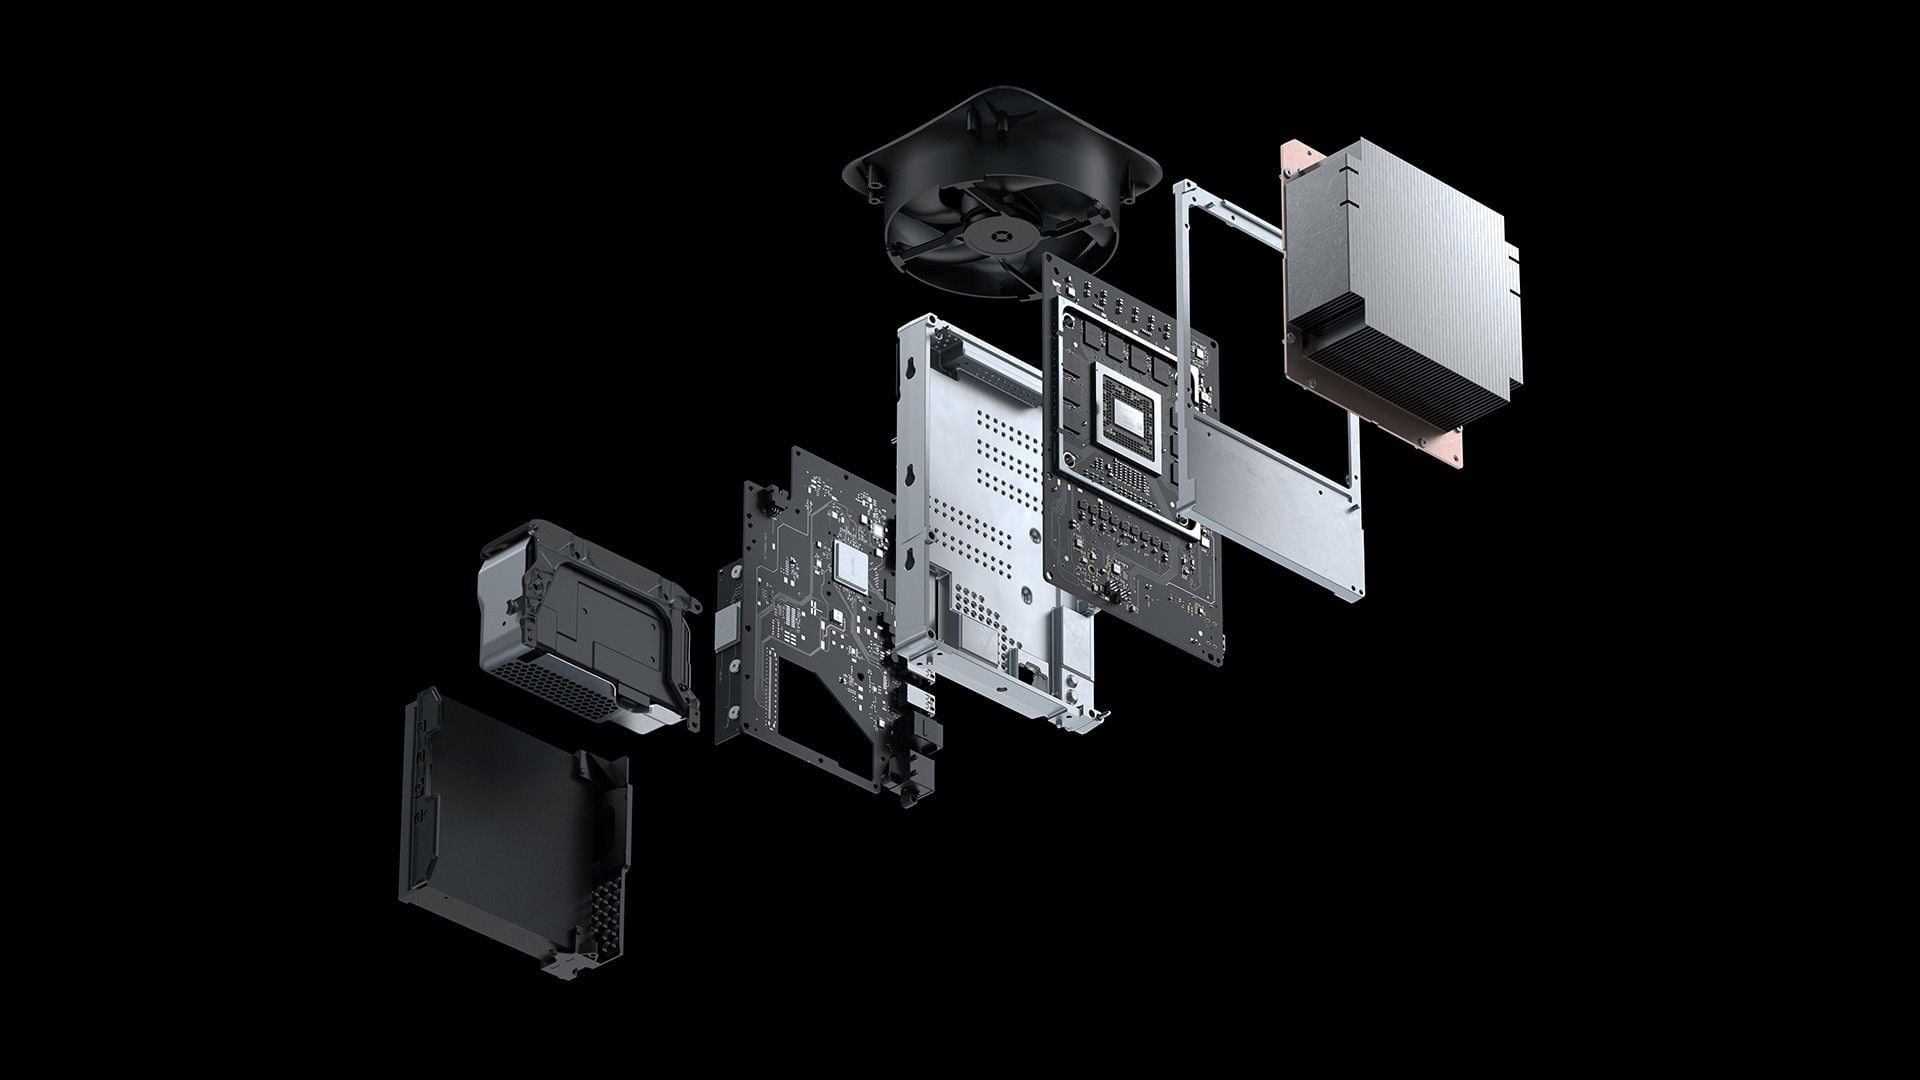 A deconstructed rendering of the new Xbox Series X' high-tech components. 